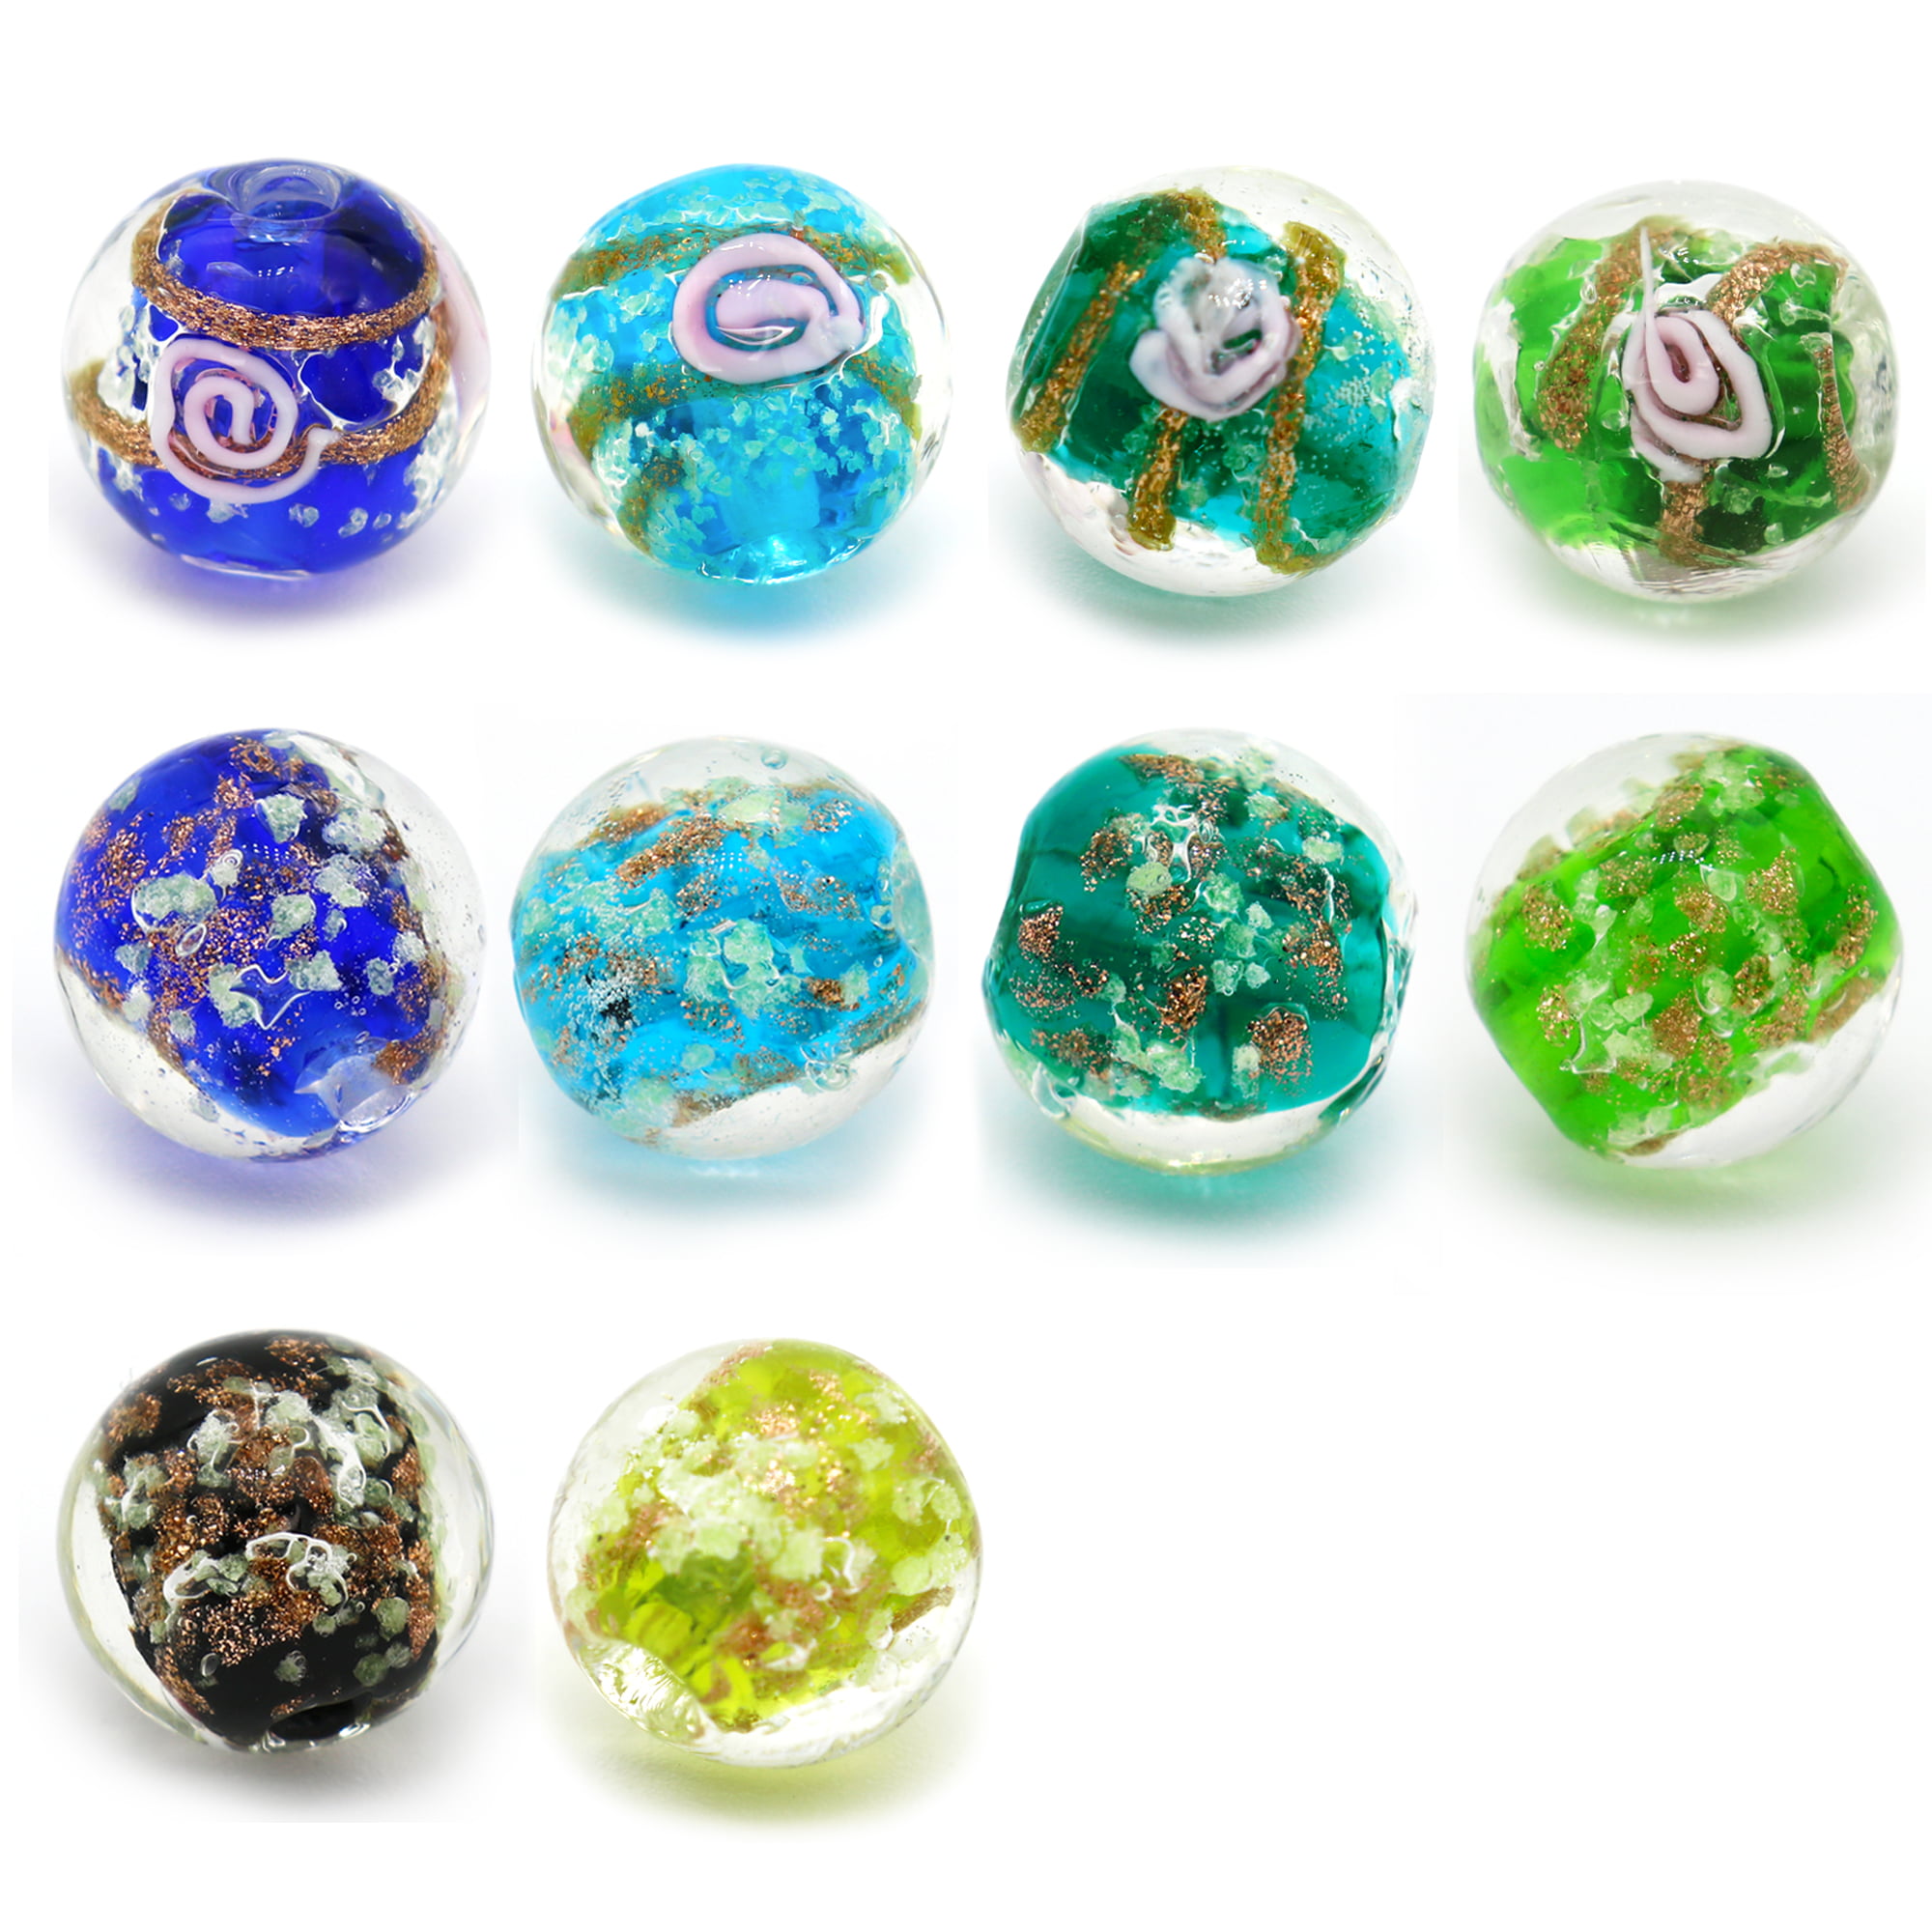 ARTSY CRAFTS 40 Pcs Assorted Blue Lampwork Glass Beads, Glow in The Dark  European Lampwork Beads, Luminous Glodsand Beads for Jewelry Making Charm  Bracelet Necklace Earrings 